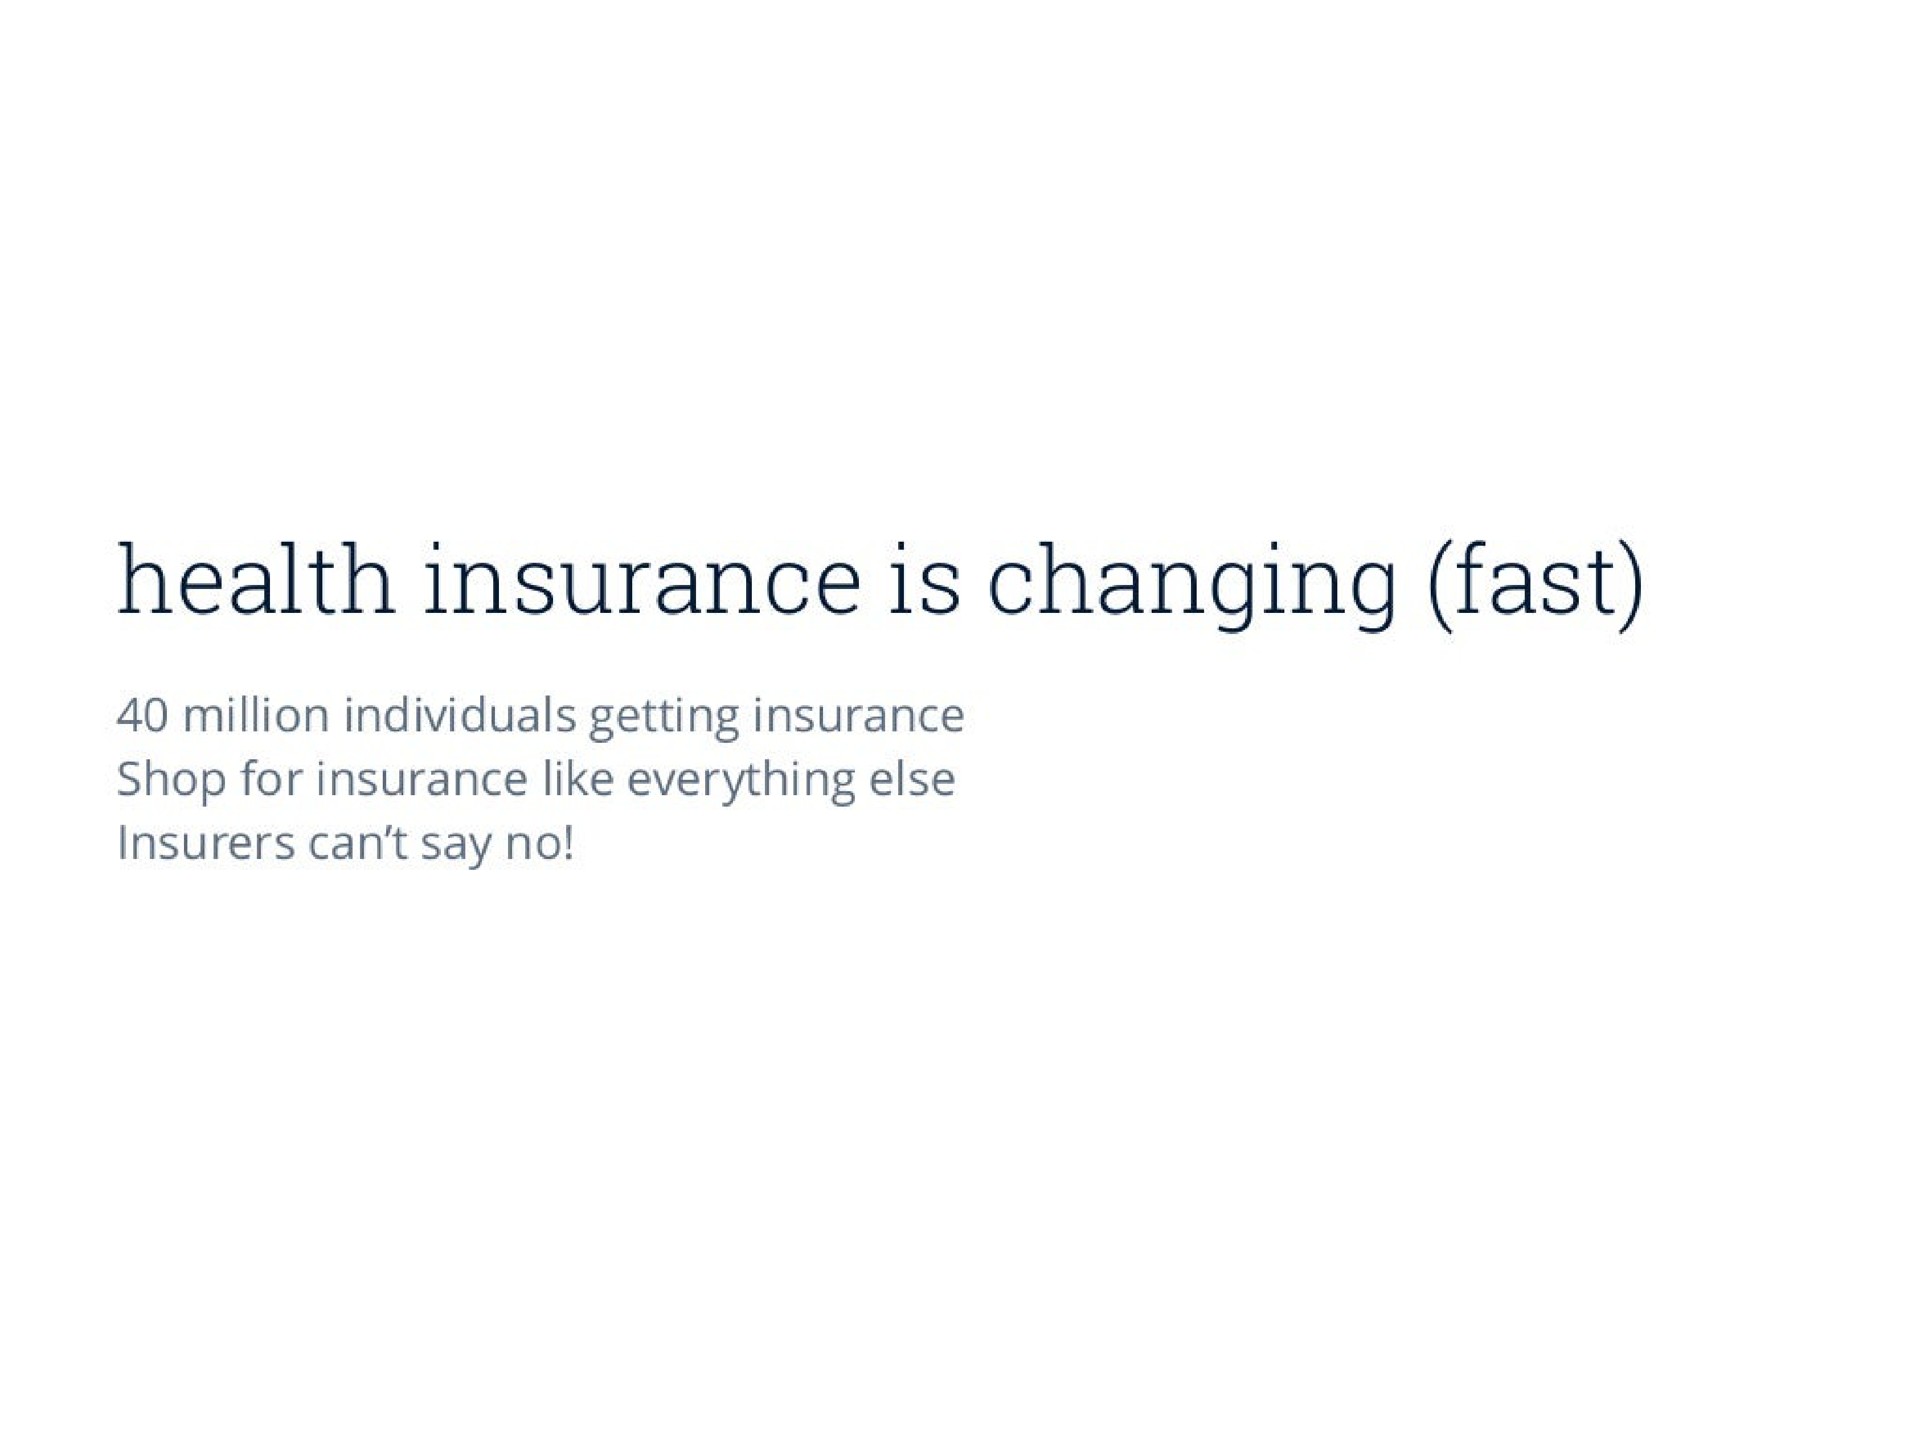 health insurance is changing fast million individuals getting insurance shop for insurance like everything else insurers can say no | Oscar Health